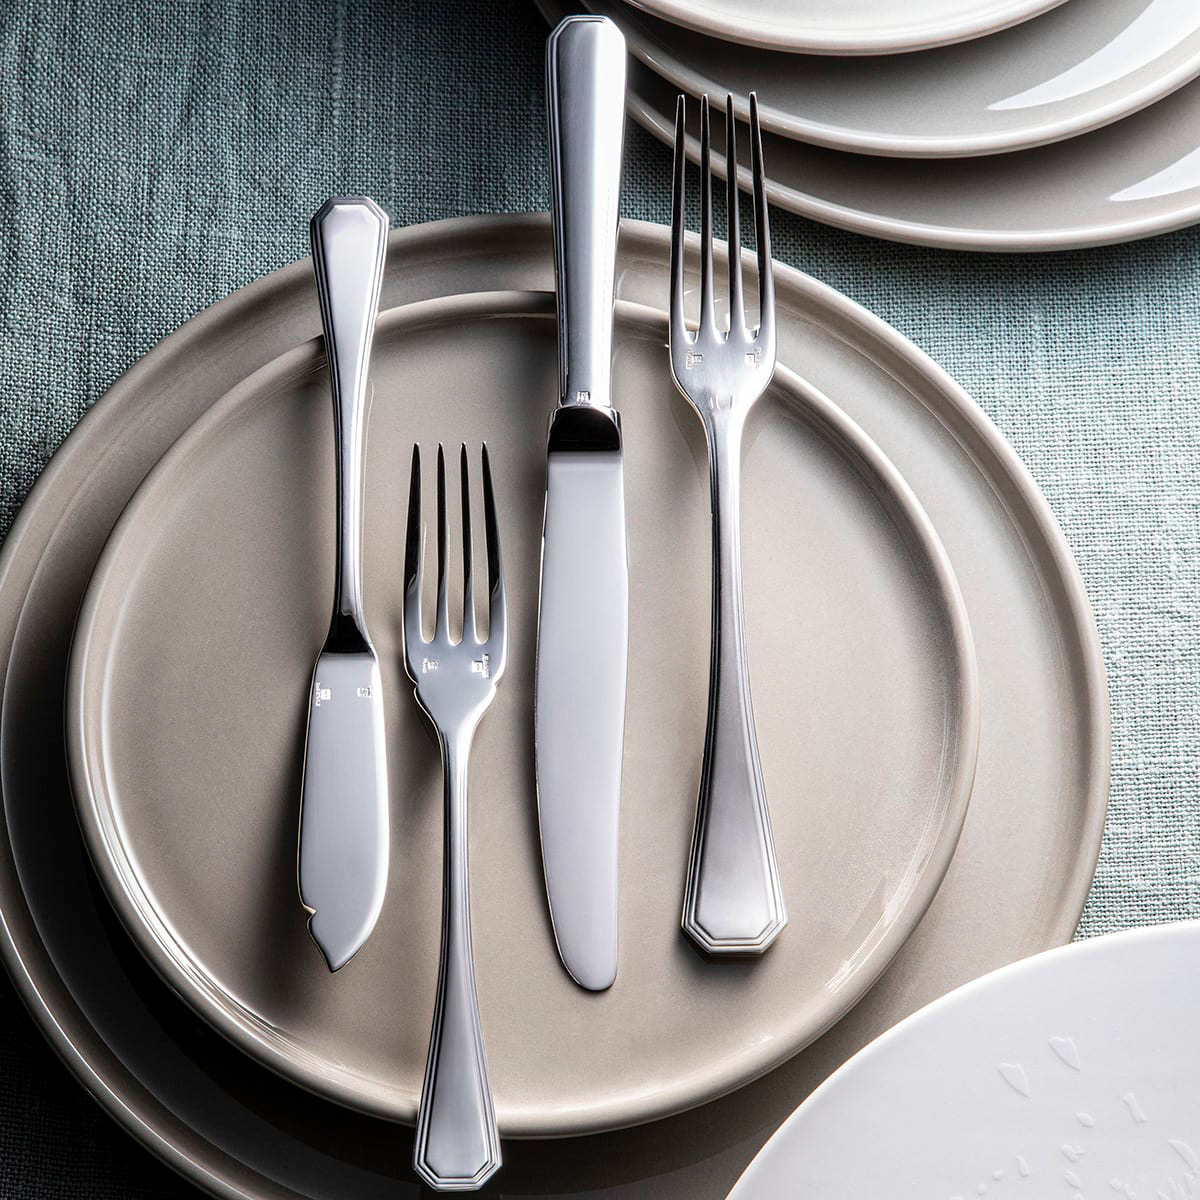 Silver-Plated serving fork